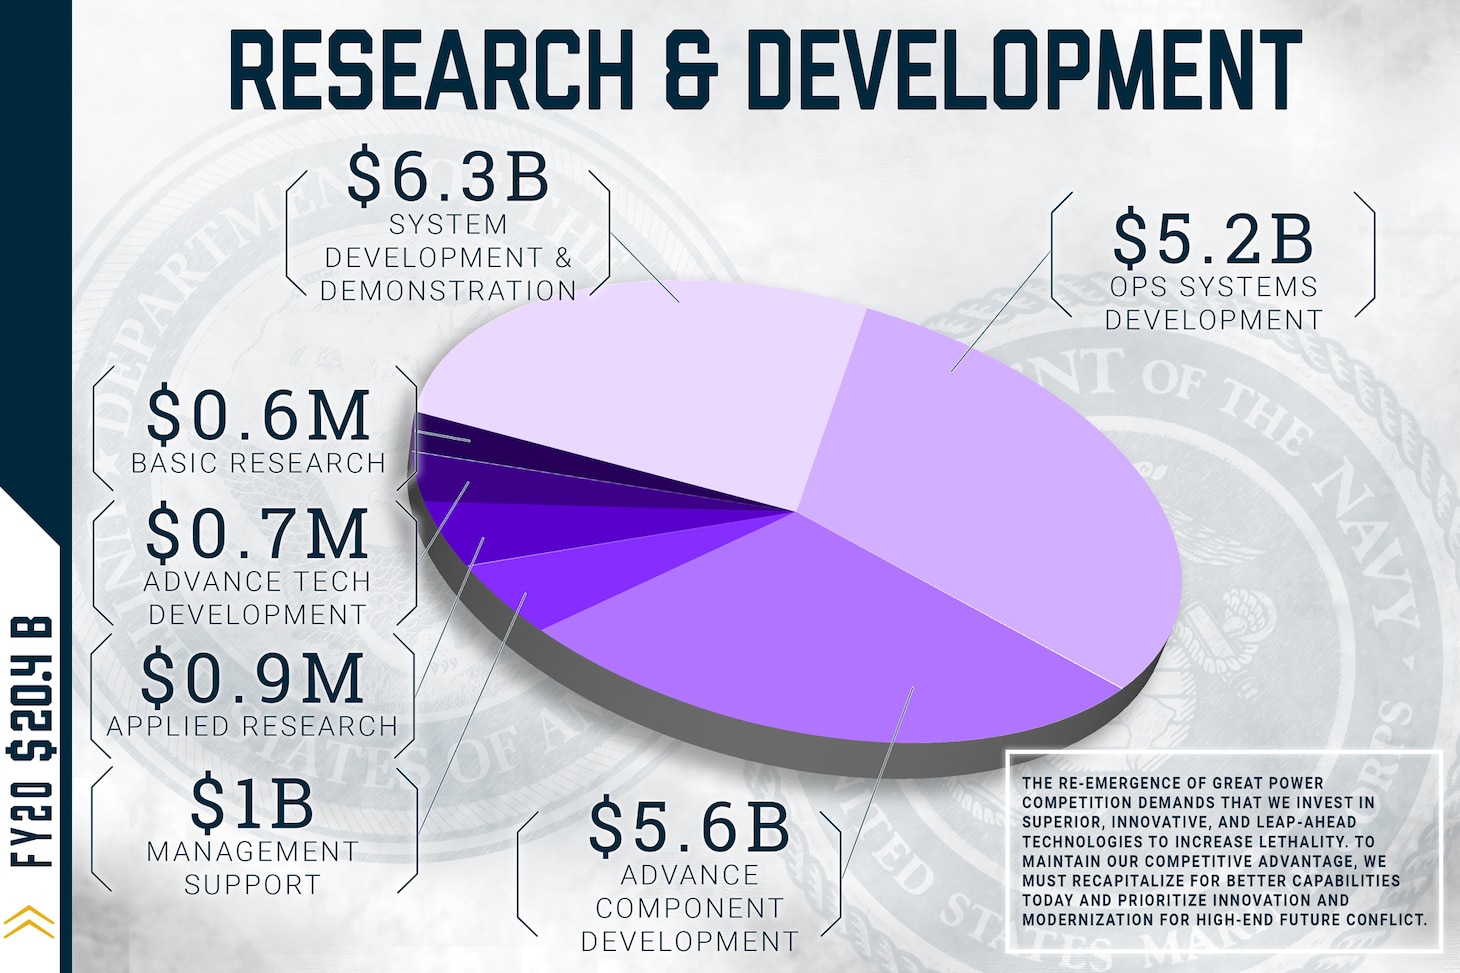 FY 2020 research and development budget.